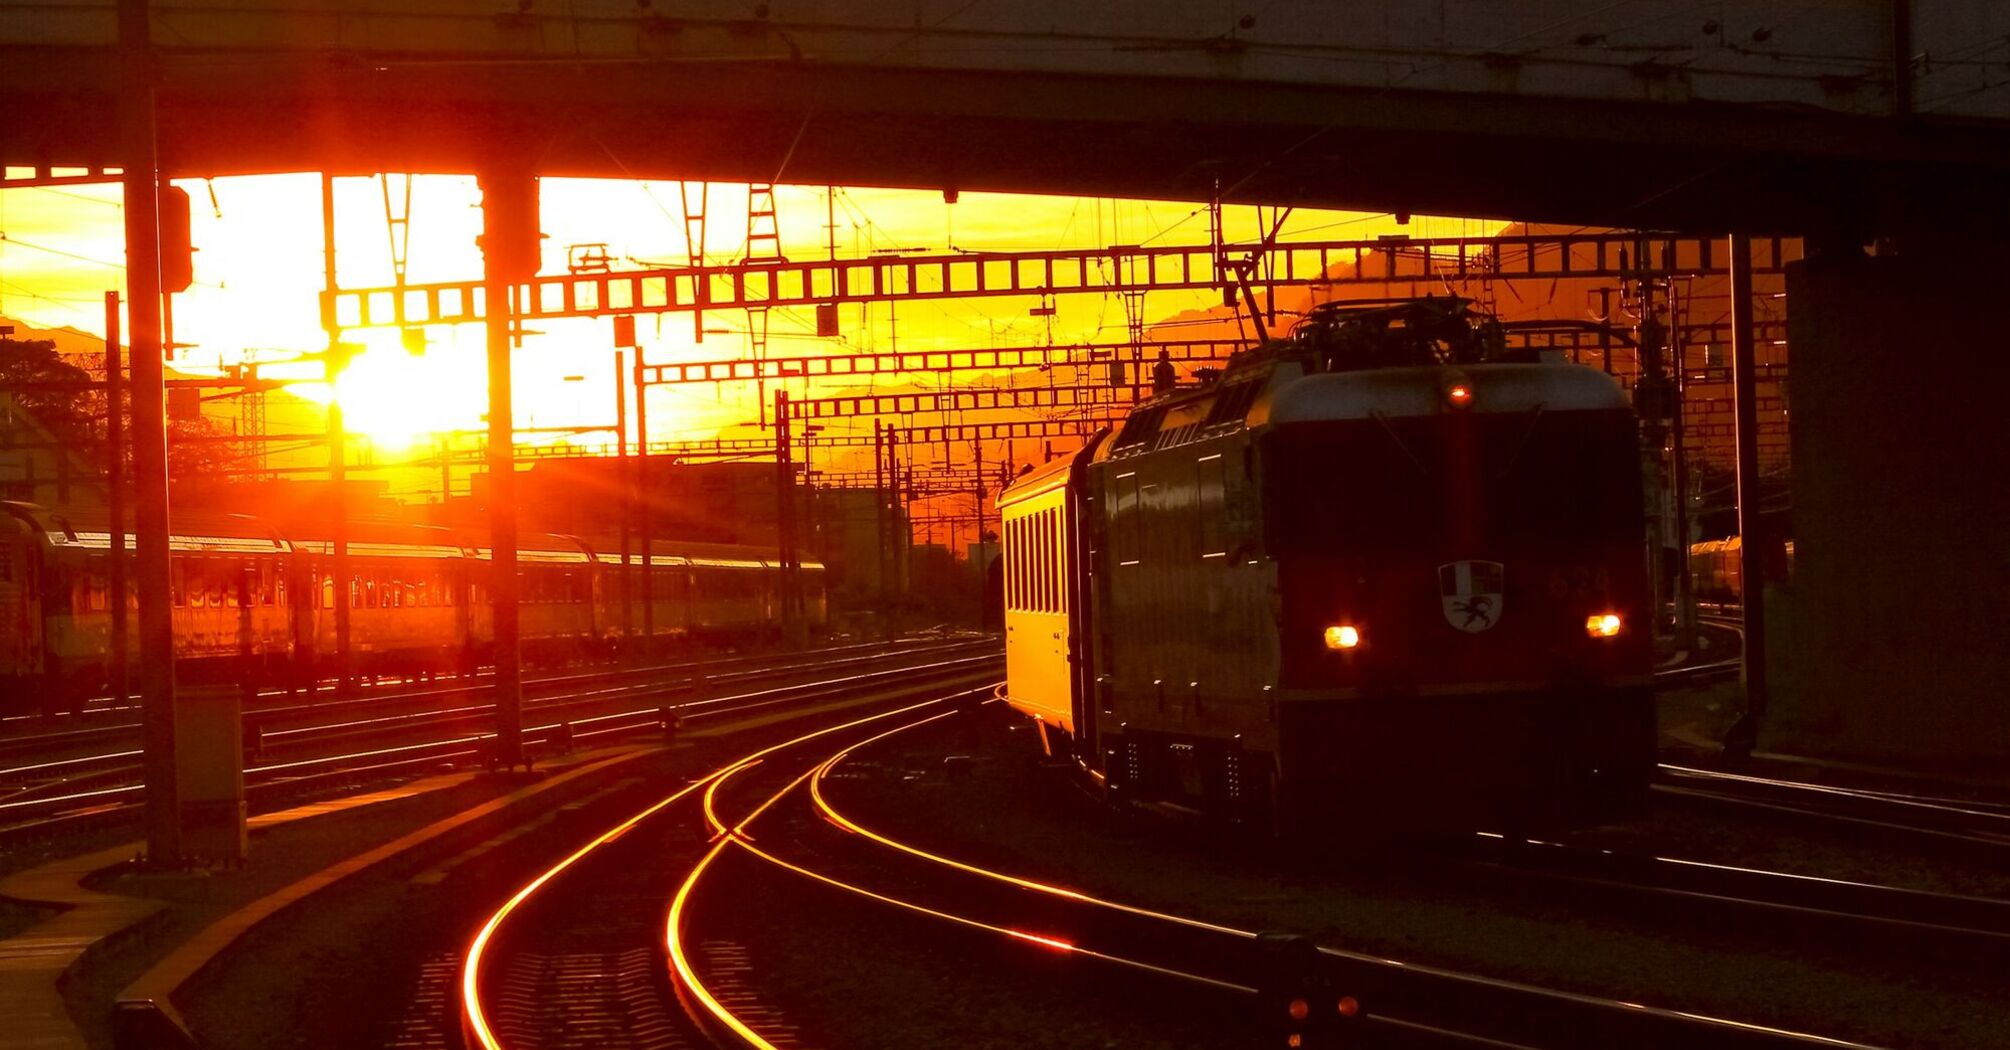 Train station at sunset with trains on the tracks